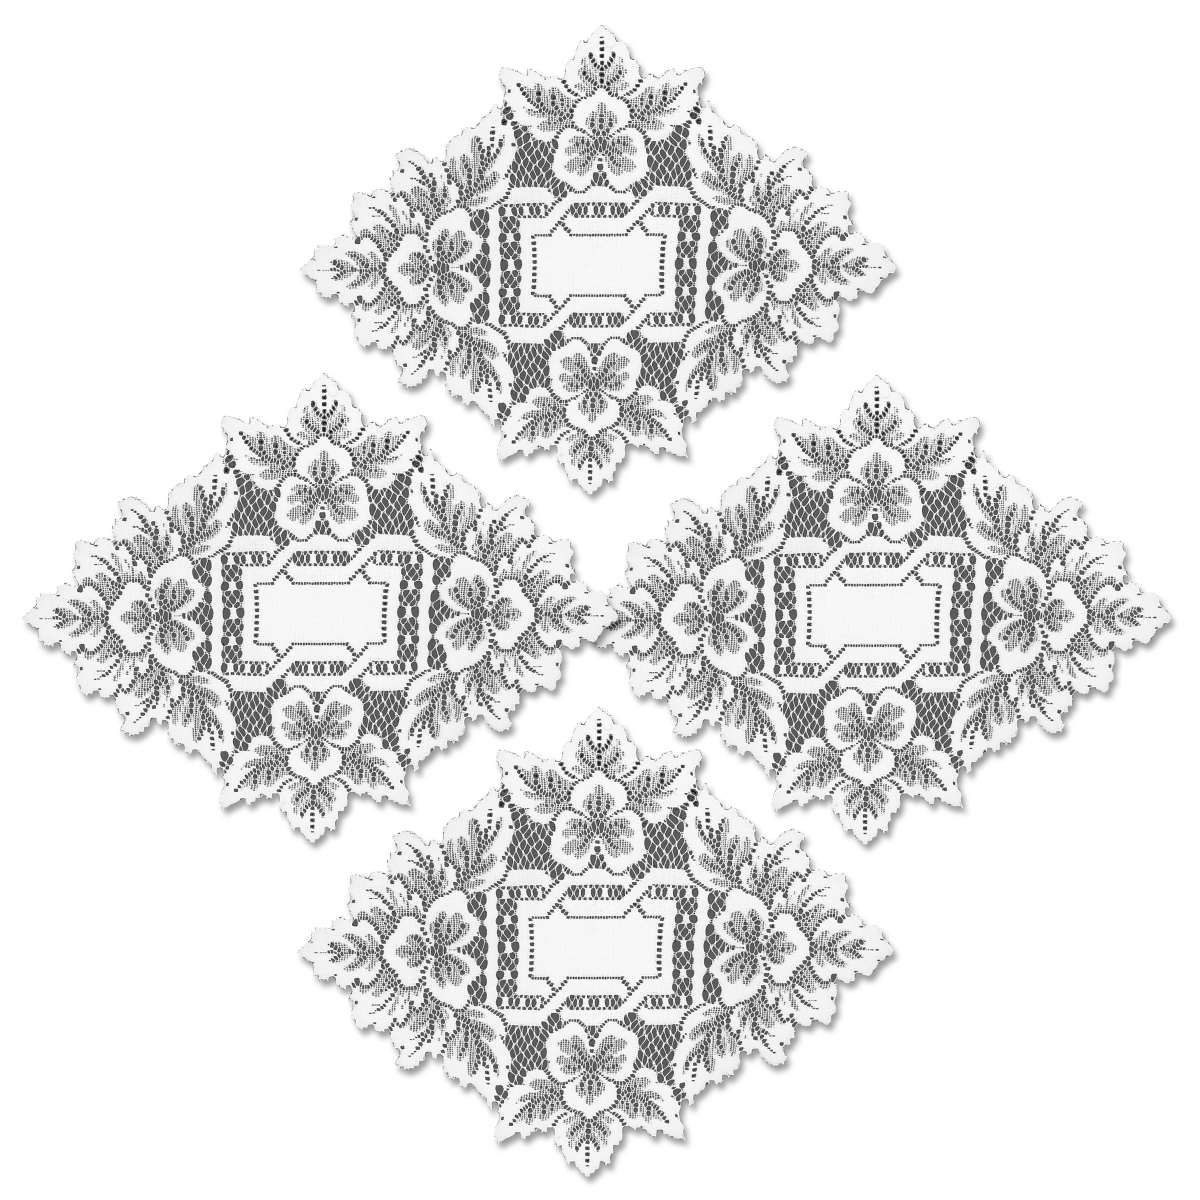 Picture of Heritage Lace HL-1209W-S 12 x 9 in. Heirloom Doily - White - Set of 4